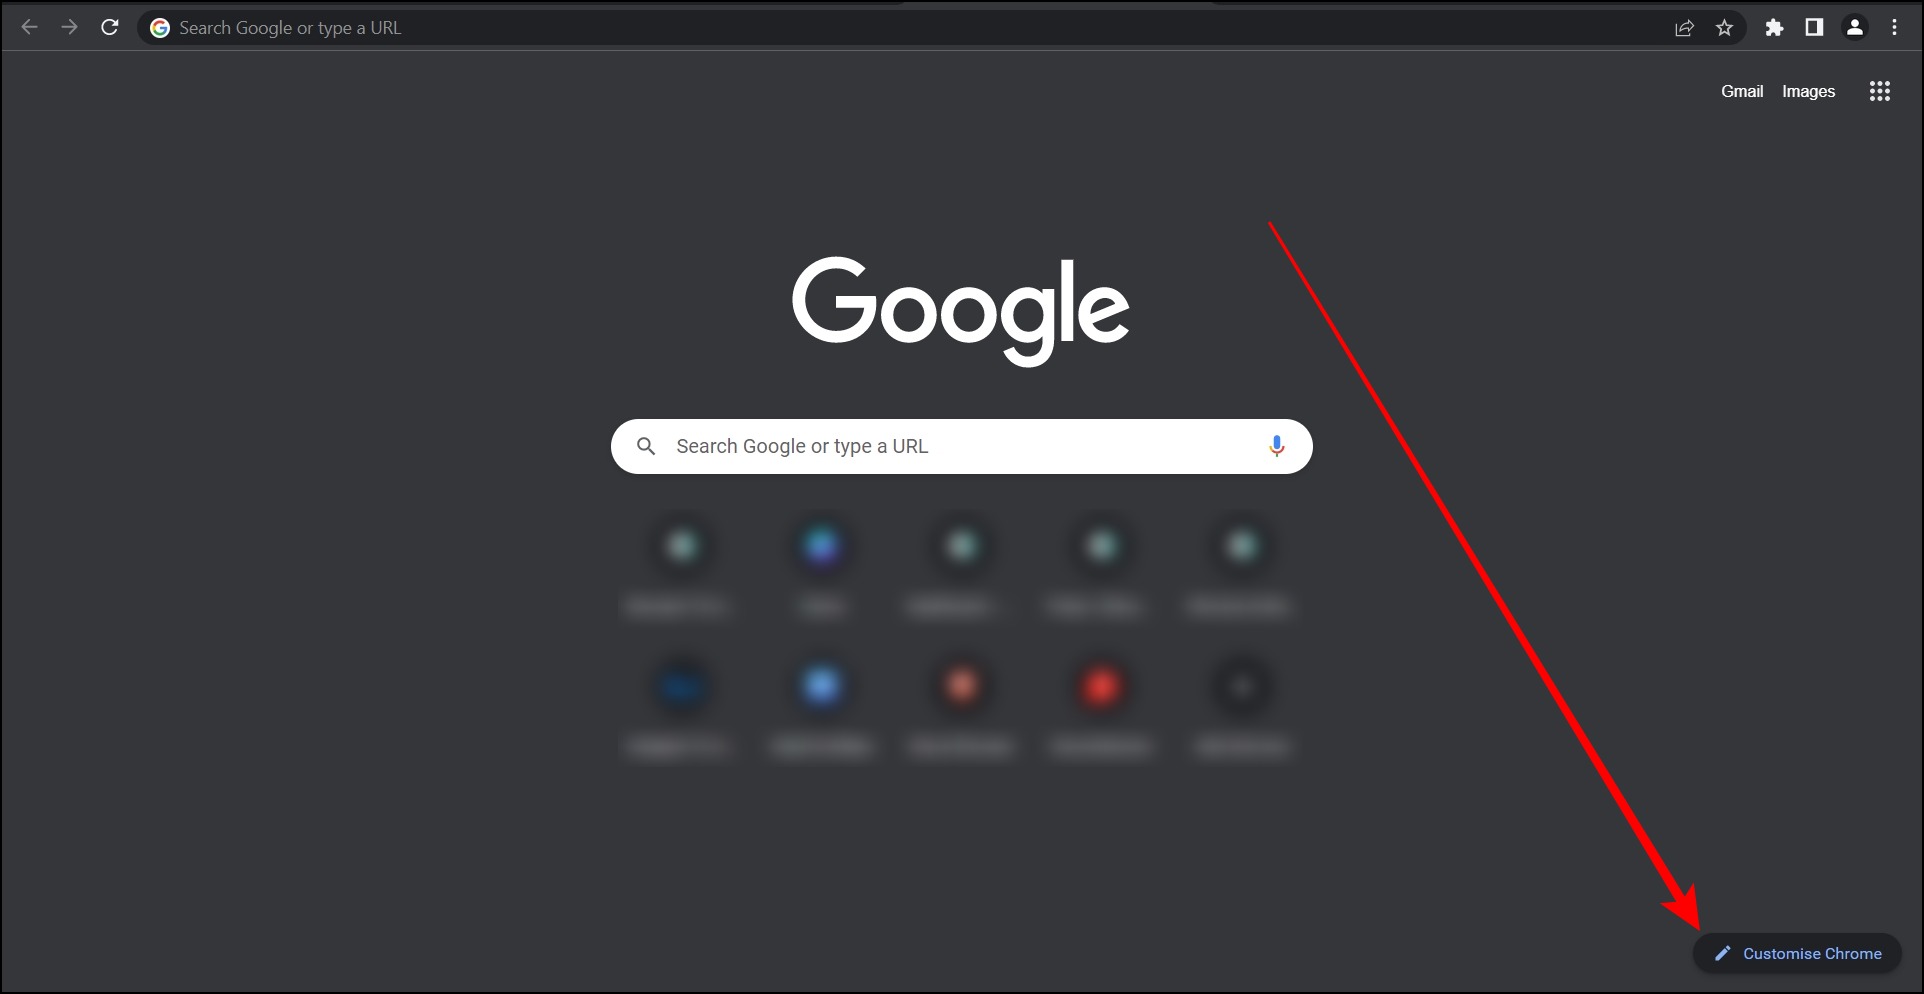 Change the Color of the browser